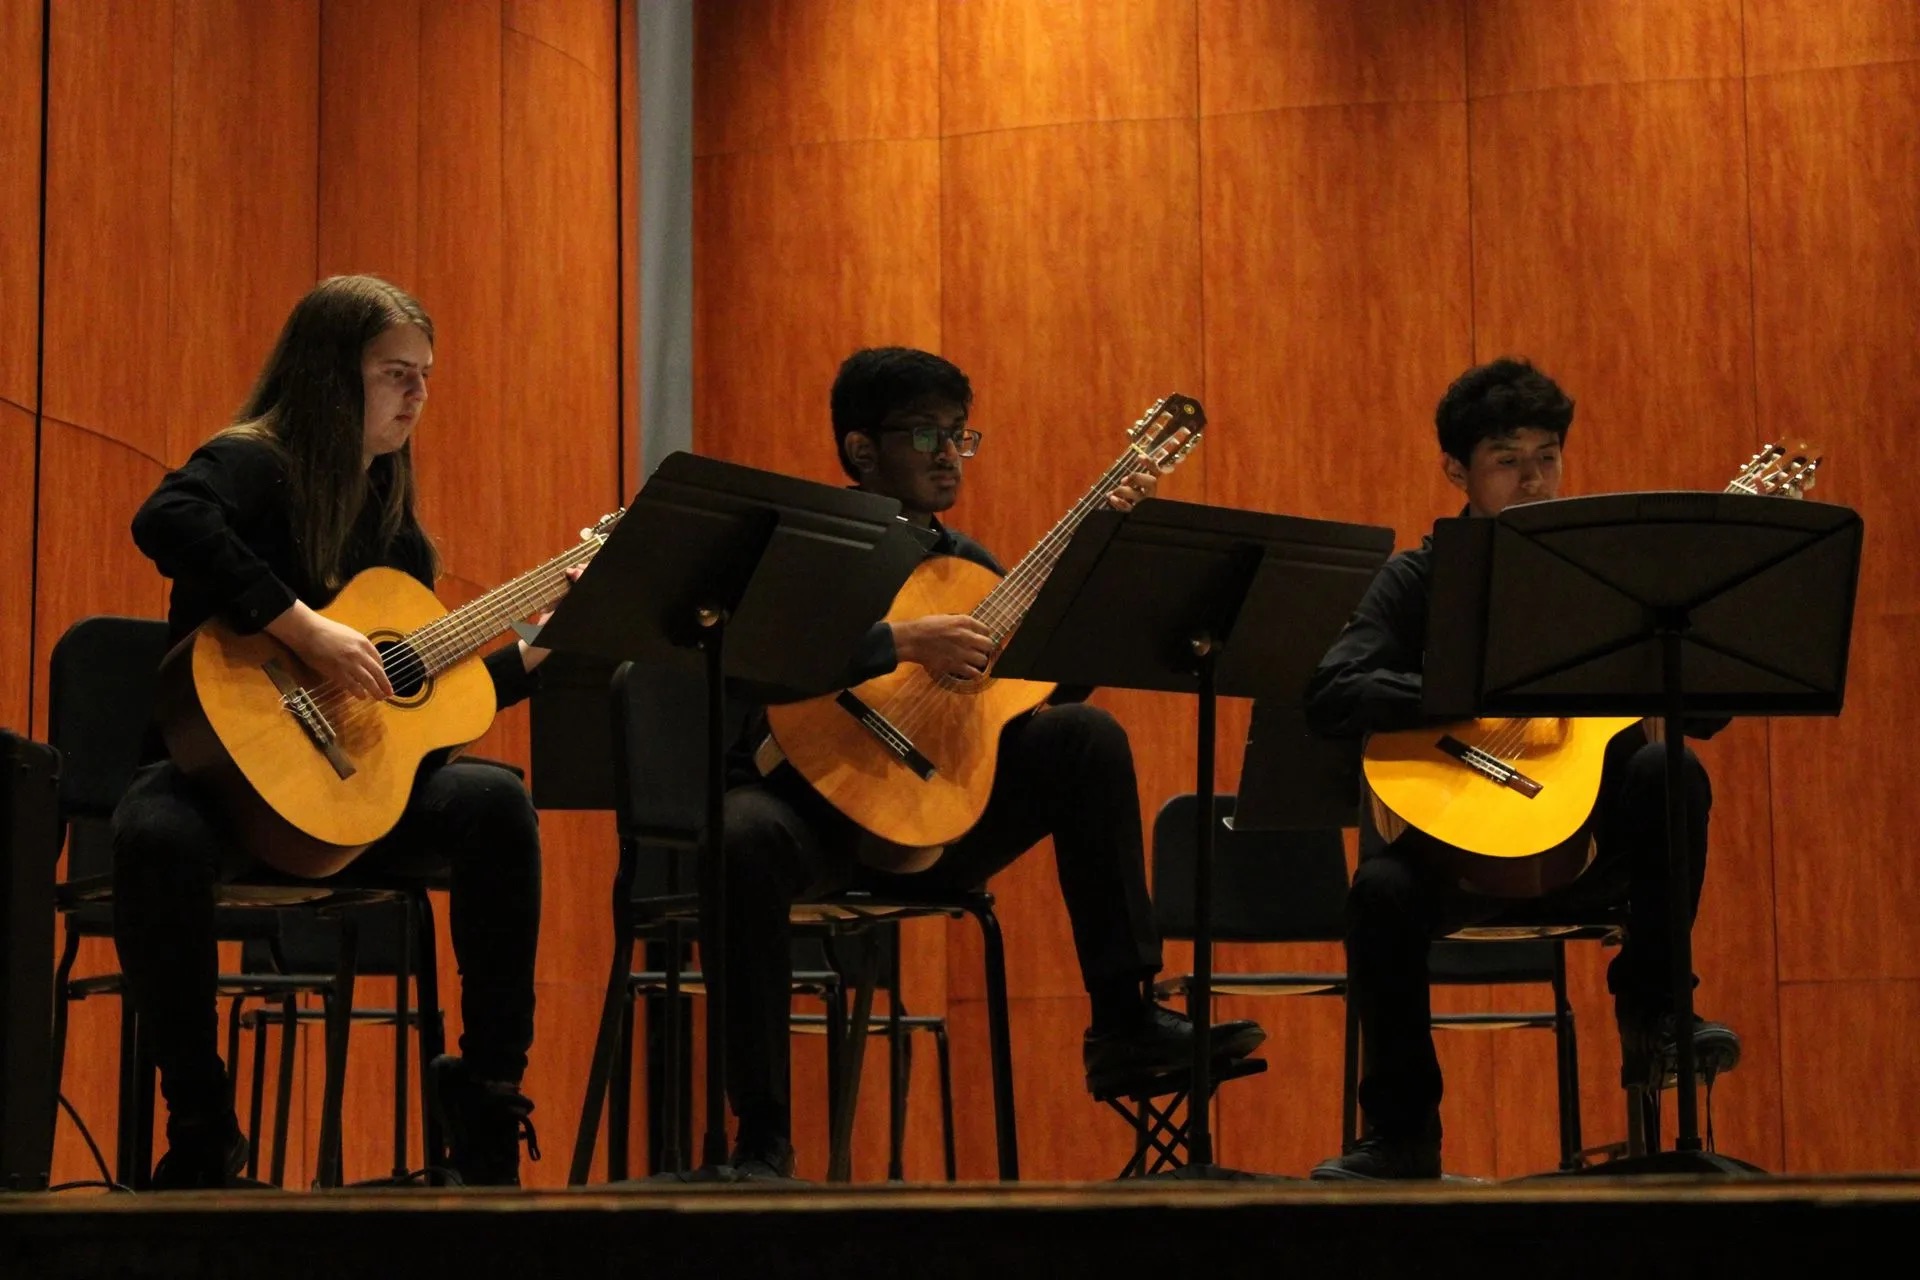 Students playing guitar